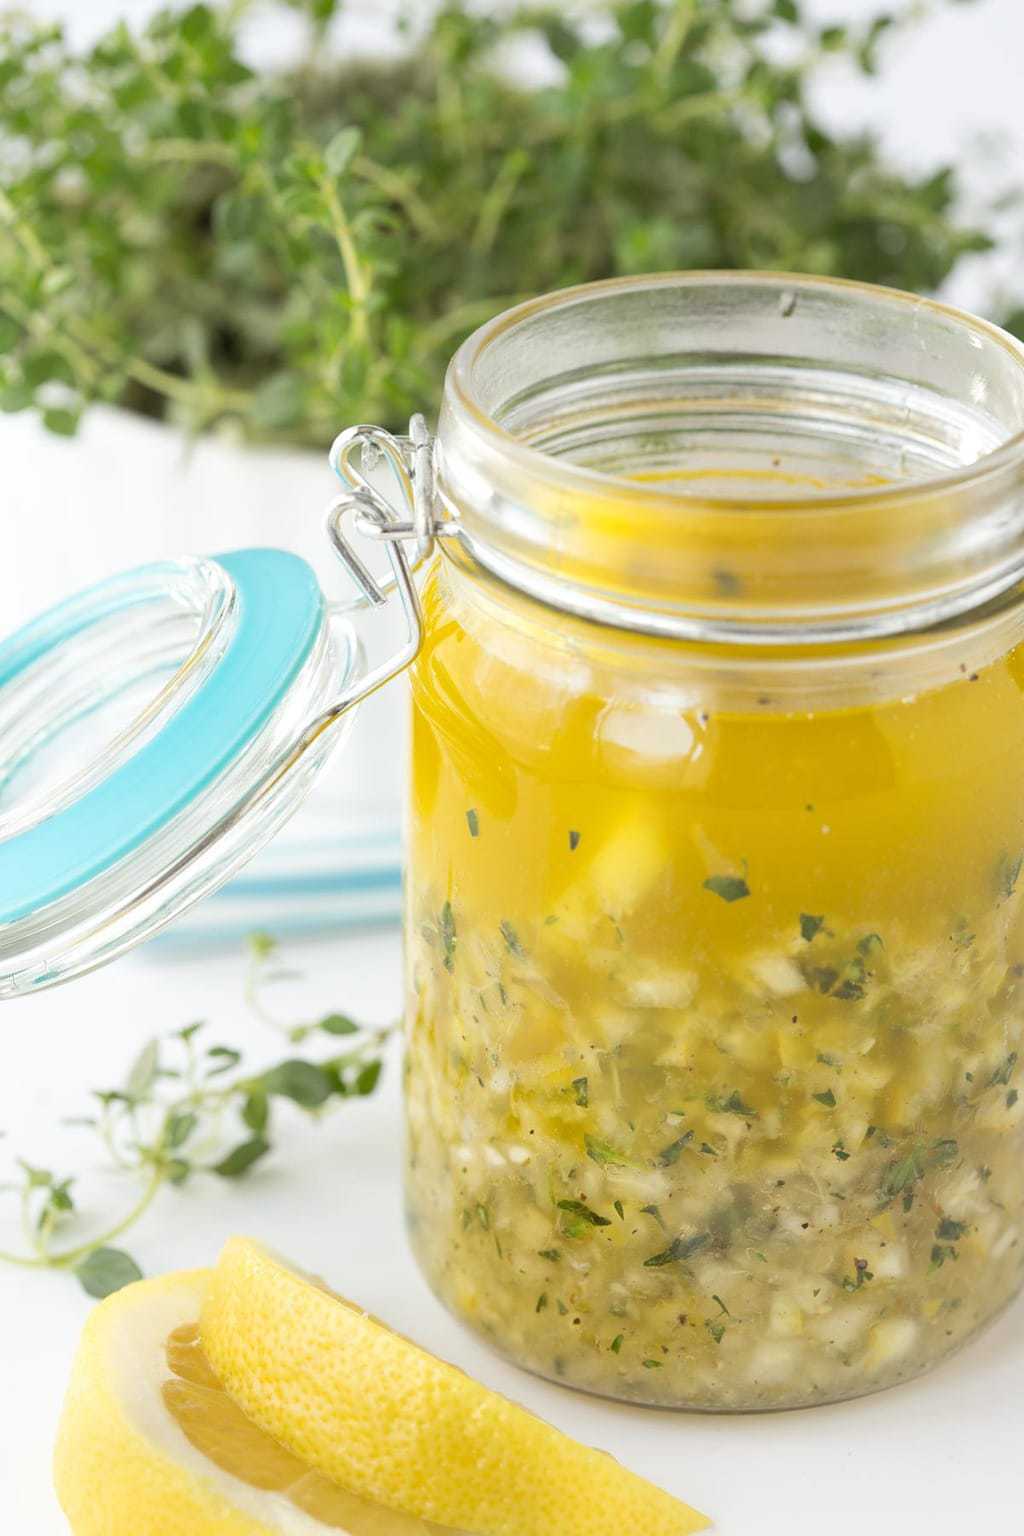 Vertical picture of whole lemon salad dressing in a glass jar